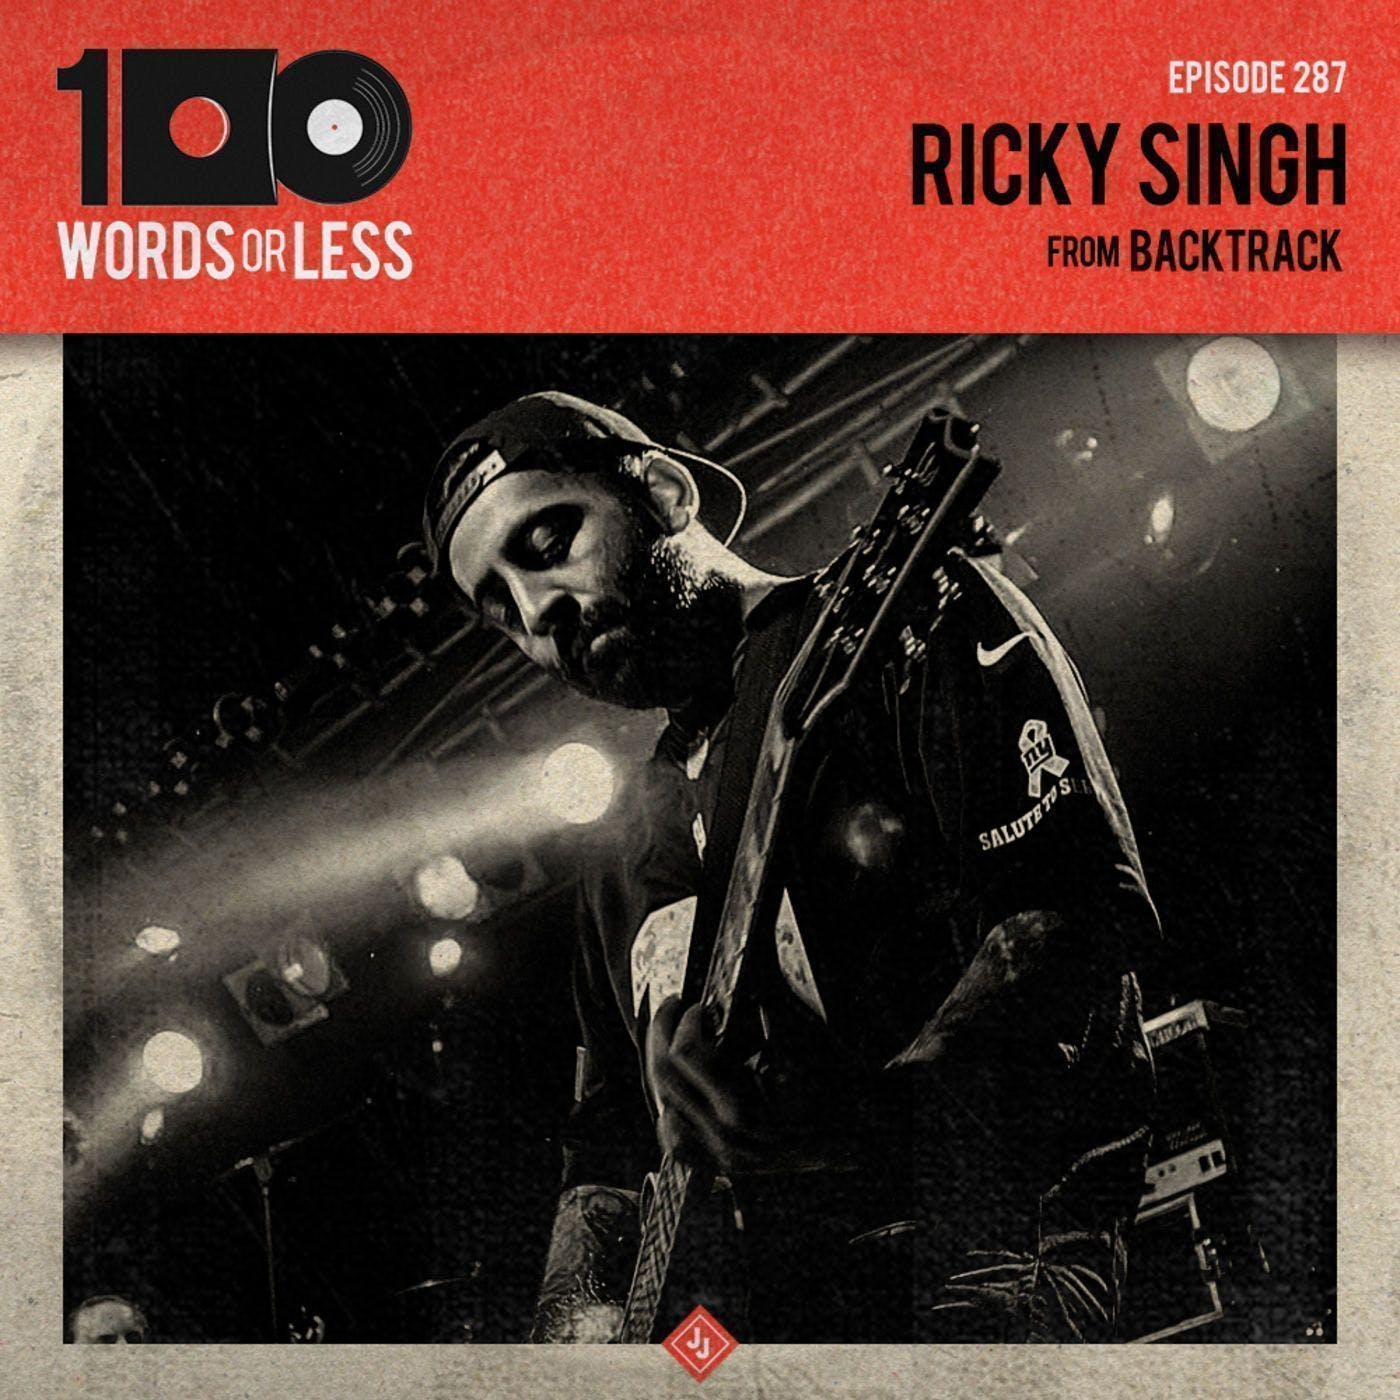 Ricky Singh from Backtrack